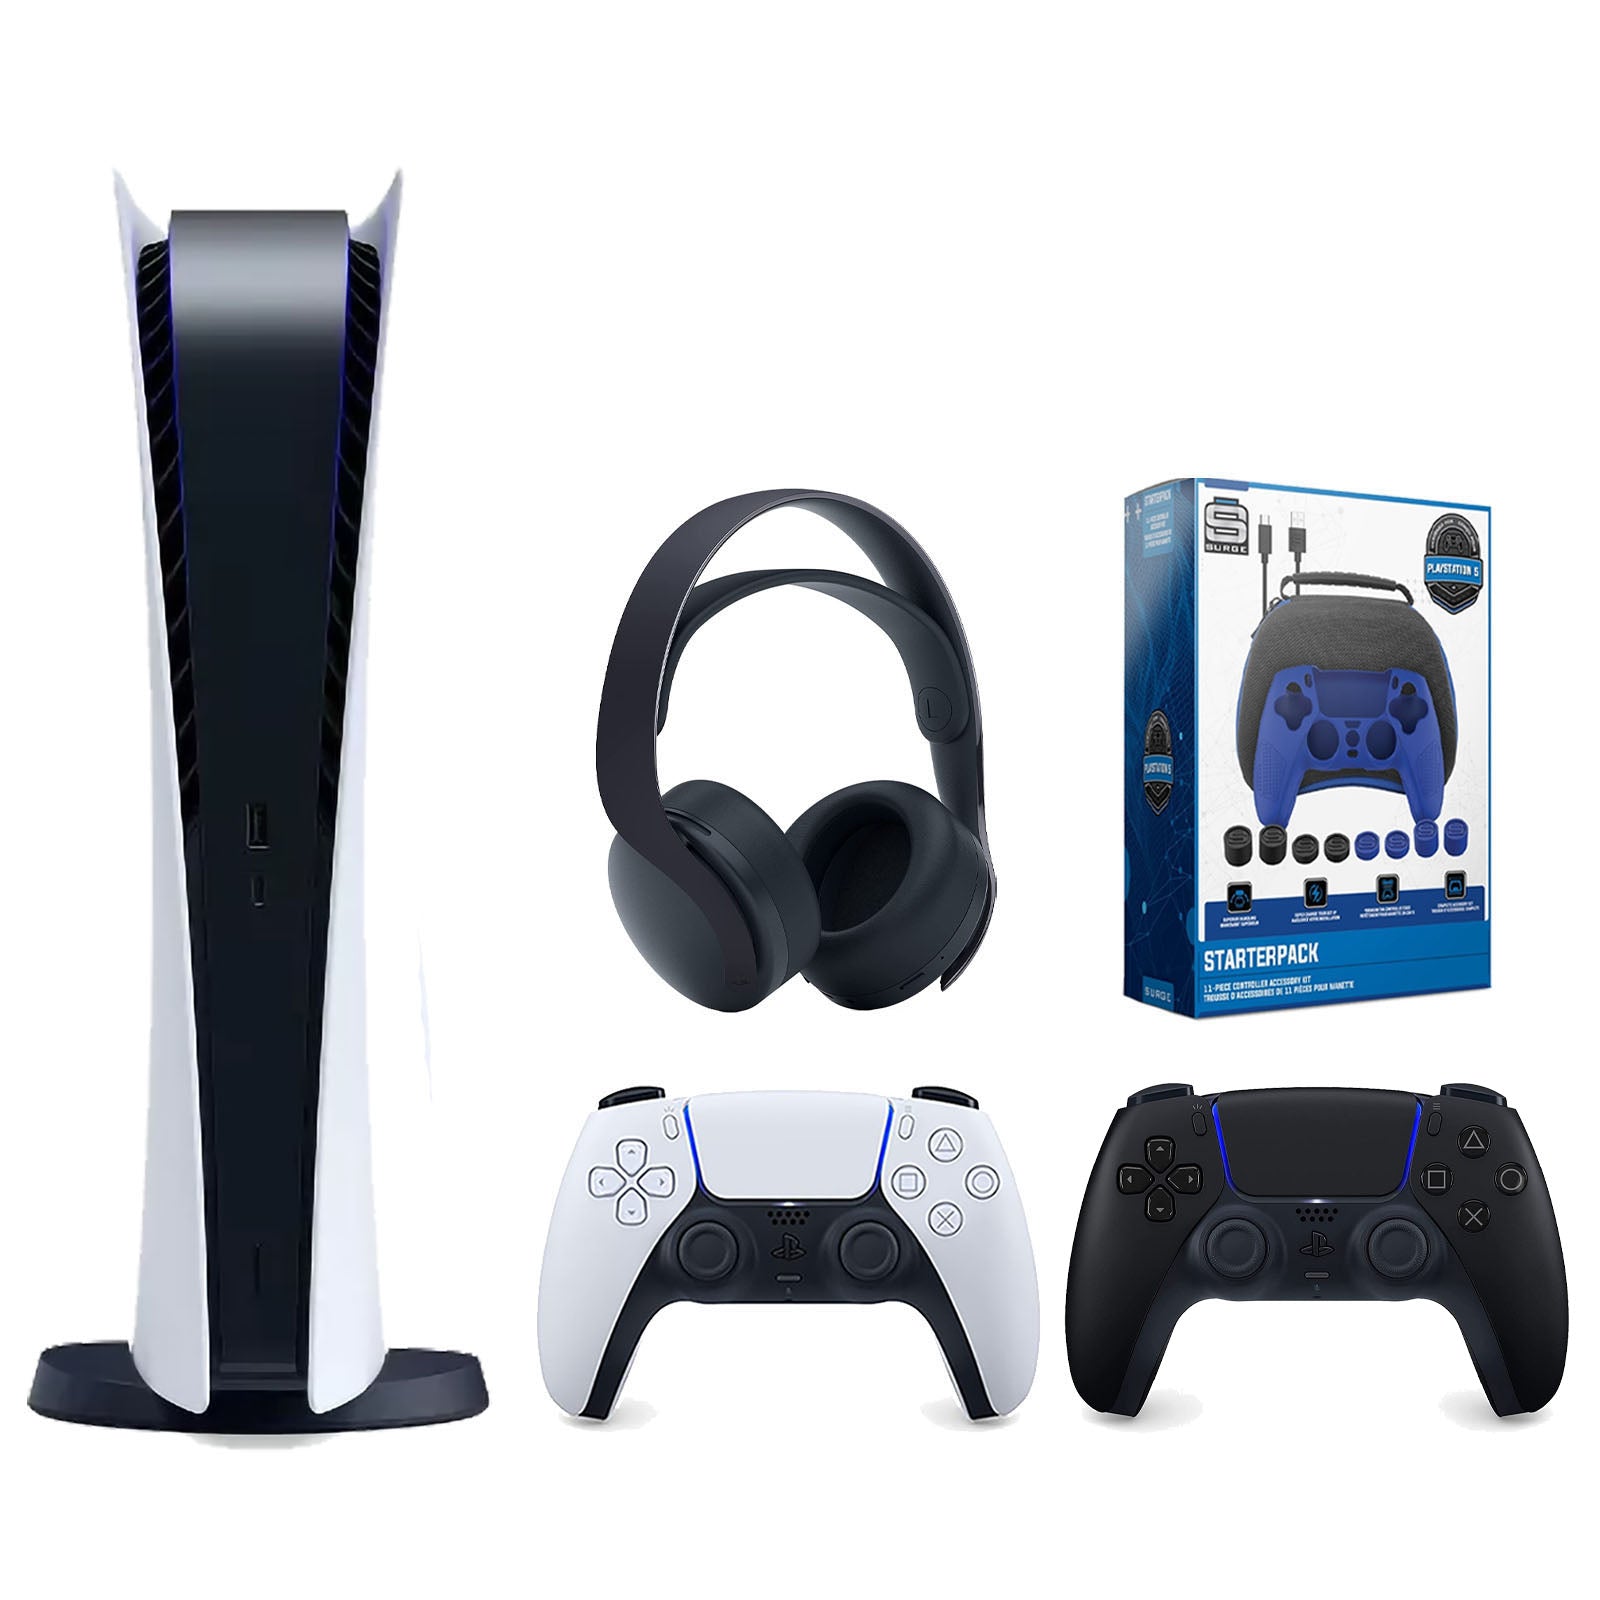 Sony Playstation 5 Digital Edition Console with Extra Black Controller, Black PULSE 3D Headset and Surge Pro Gamer Starter Pack 11-Piece Accessory Bundle - Pro-Distributing